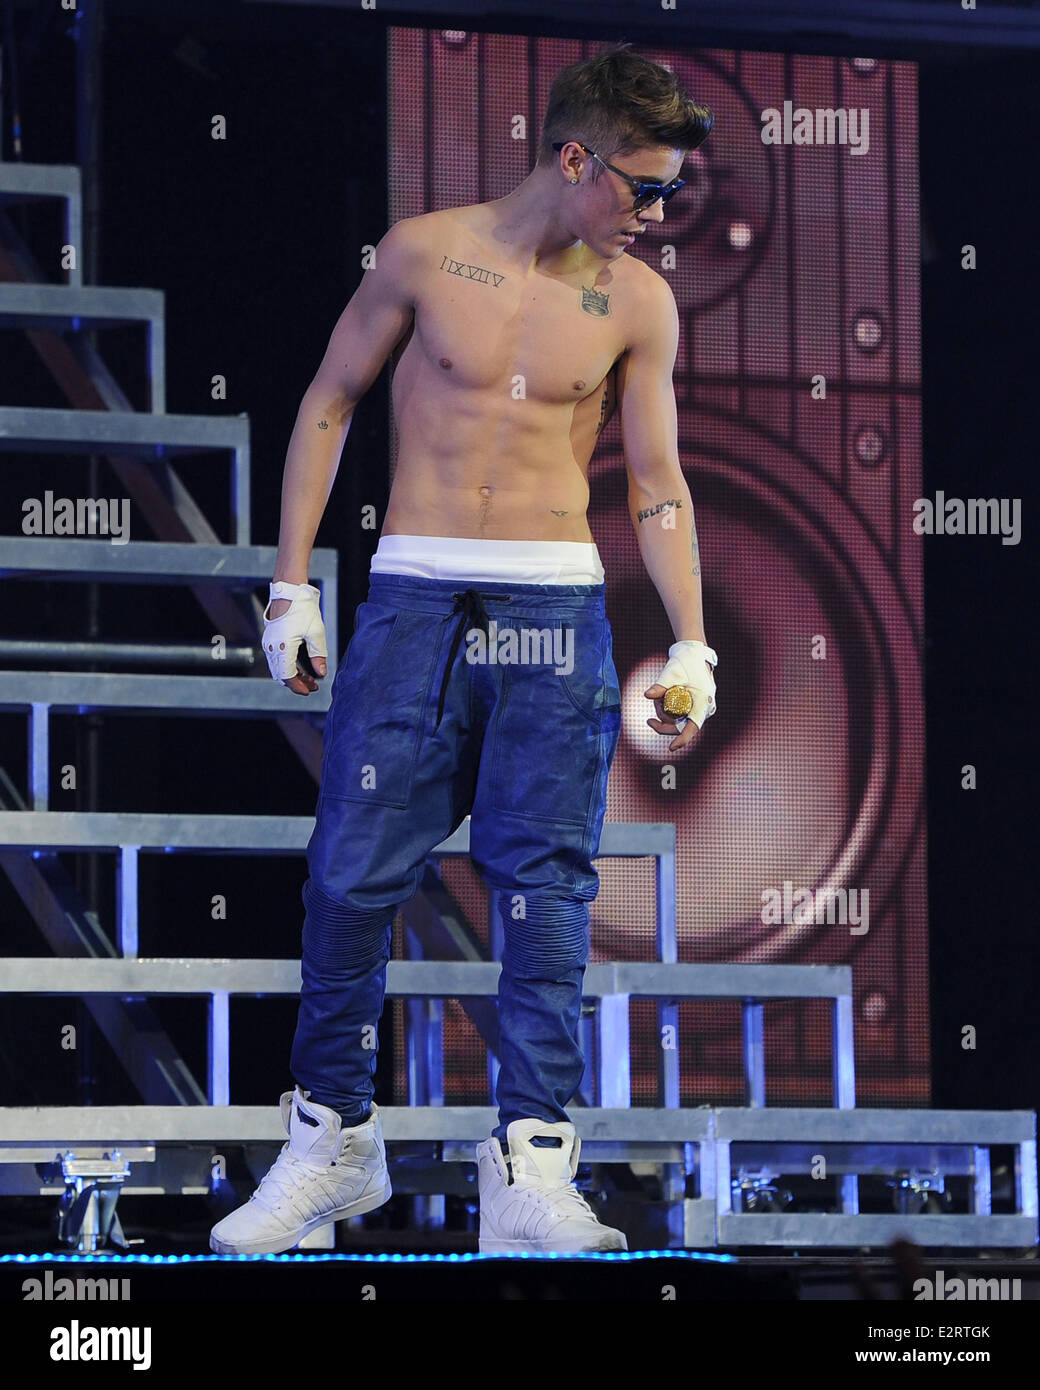 Justin Bieber performs live at the St Pete Times Forum. Bieber excited fans  and took off his tank top during a song Featuring: Justin Bieber Where:  Tampa, Florida, United States When: 25